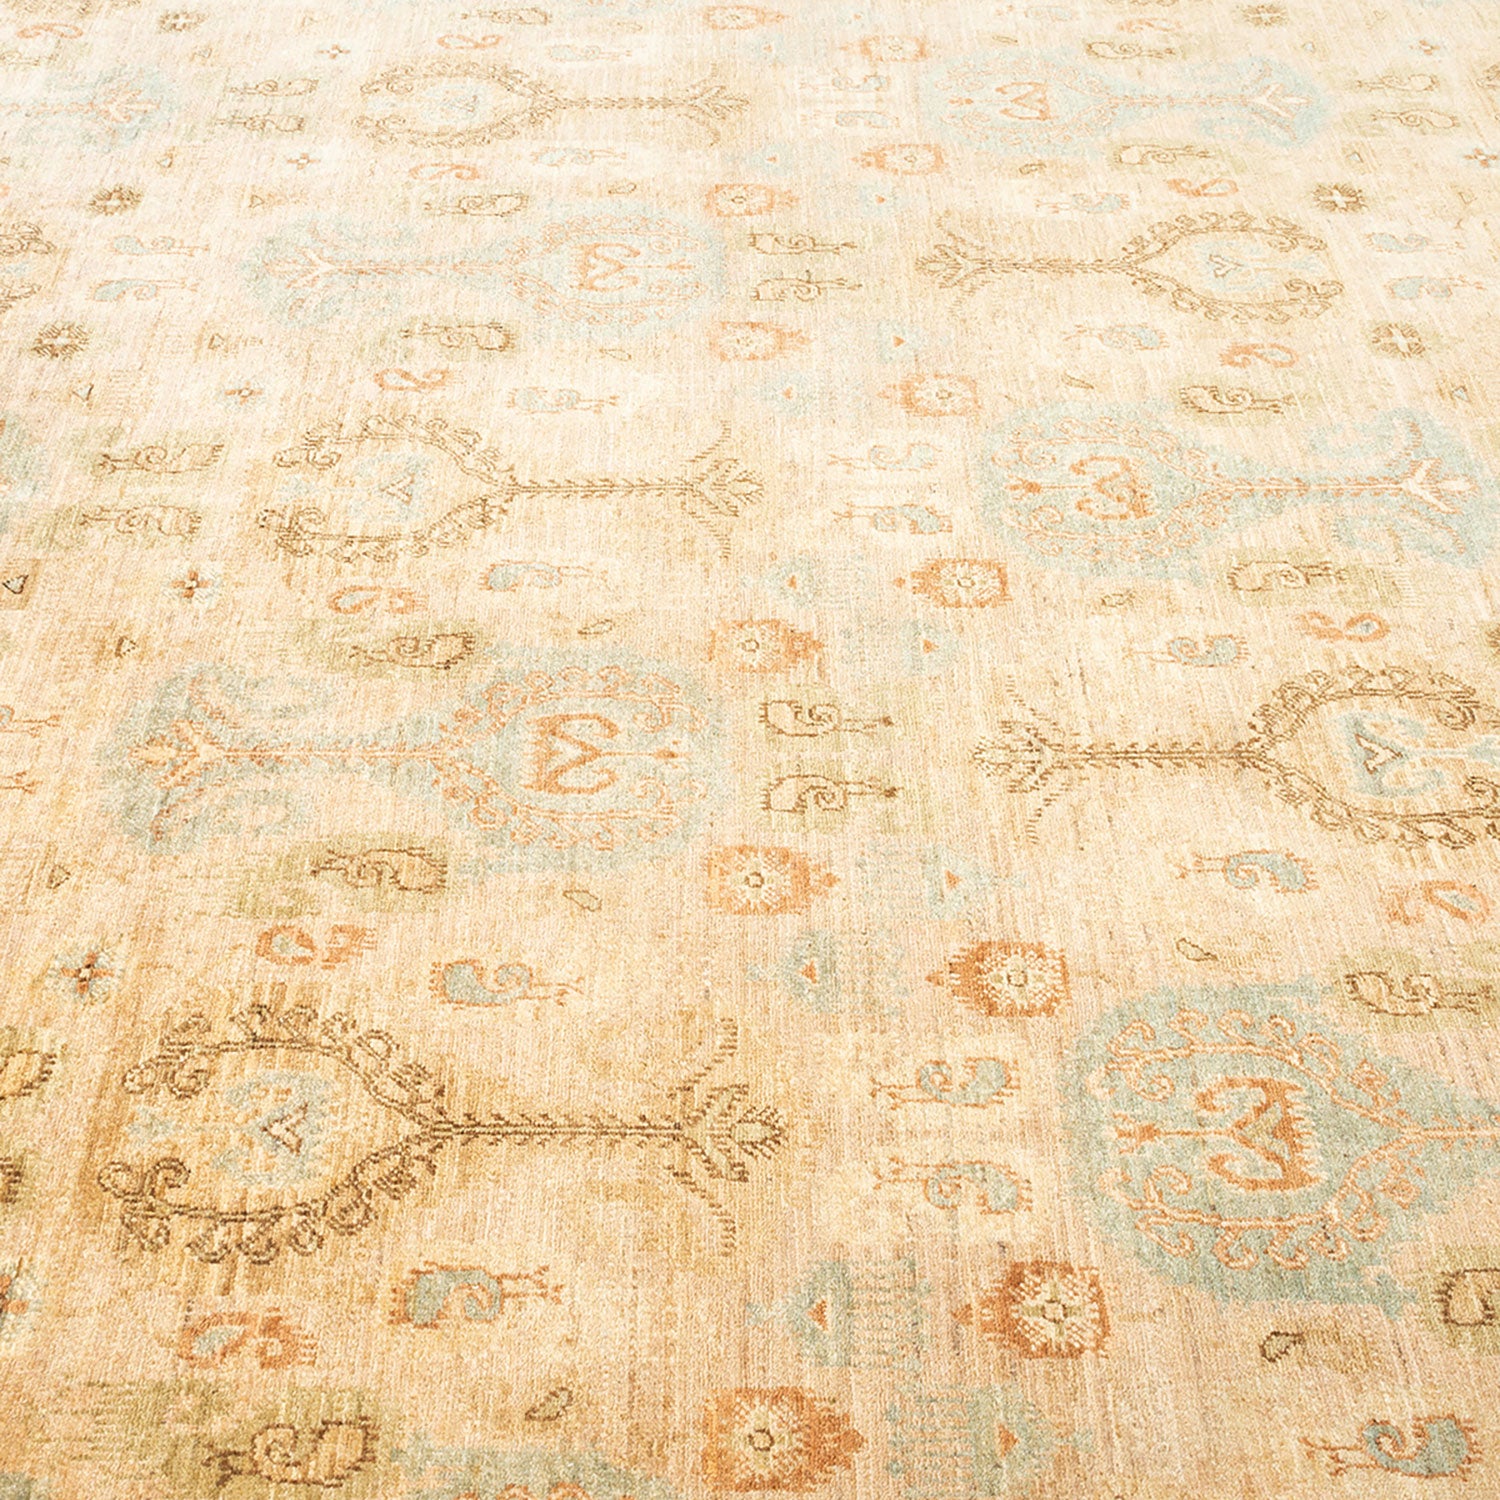 Intricately designed vintage carpet with animal, geometric, and floral motifs.